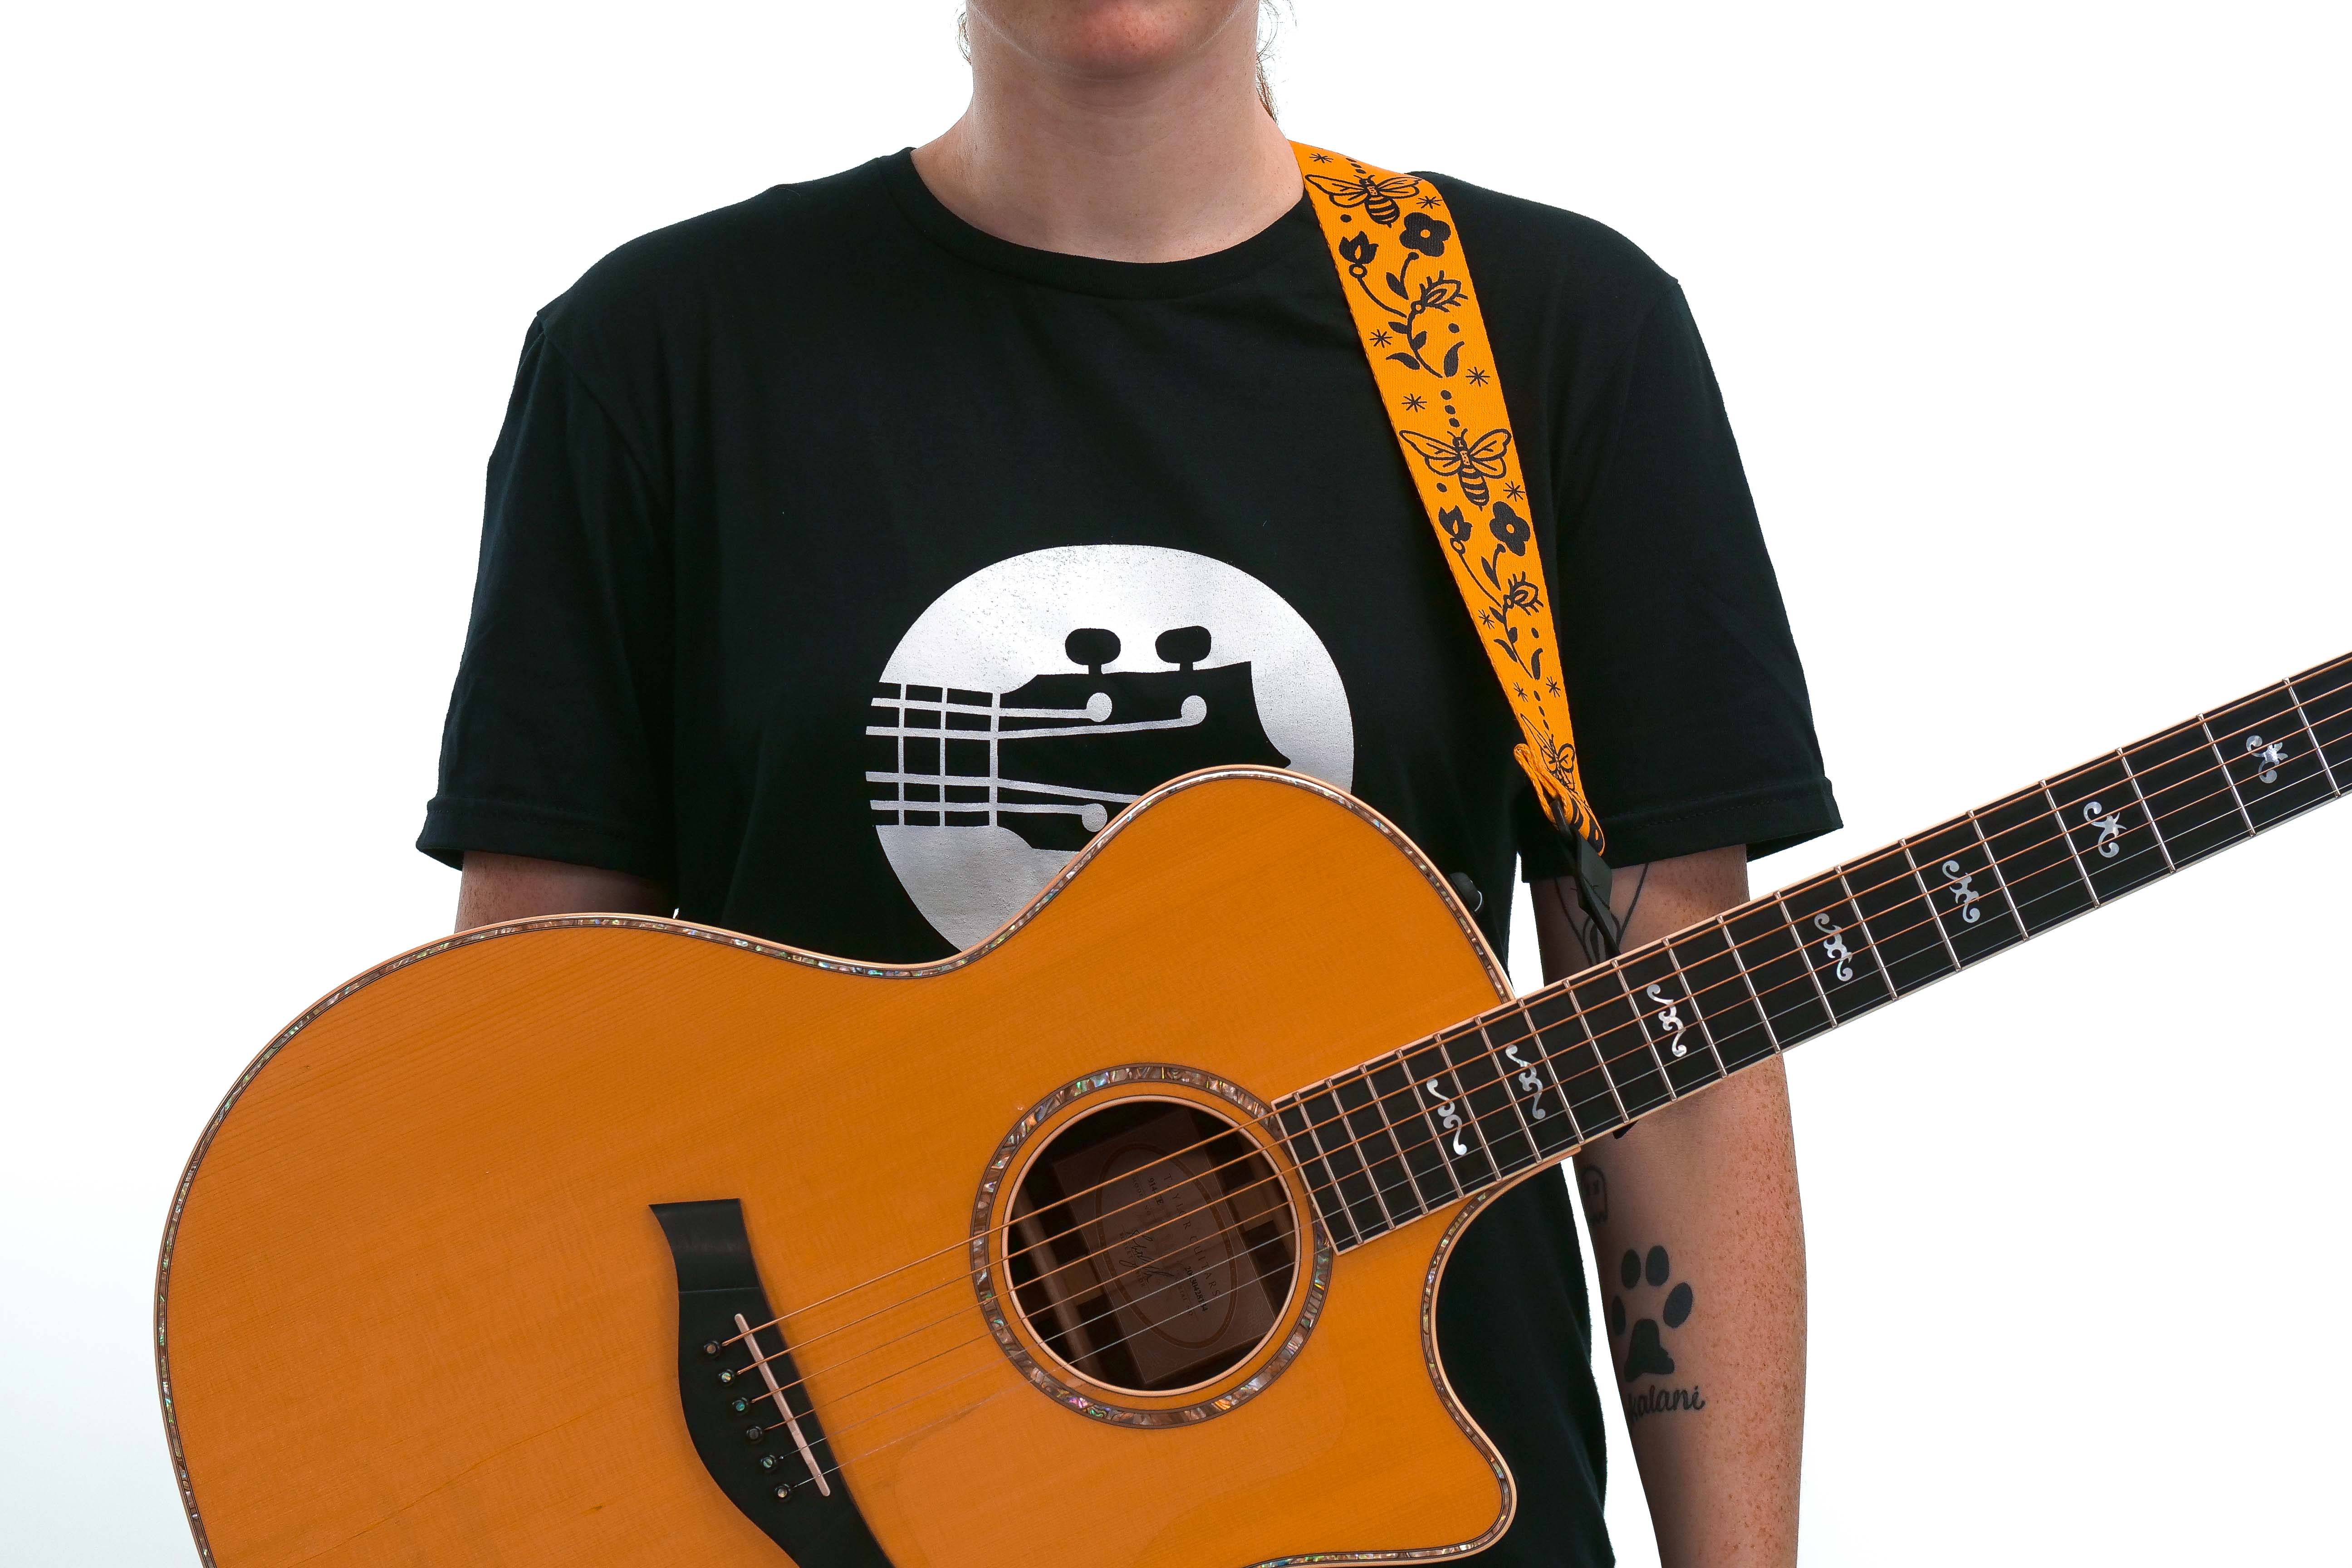 Terry Carter Music Store 2 Inch Sublimation Guitar and Ukulele Strap - YELLOW/BLACK BEES